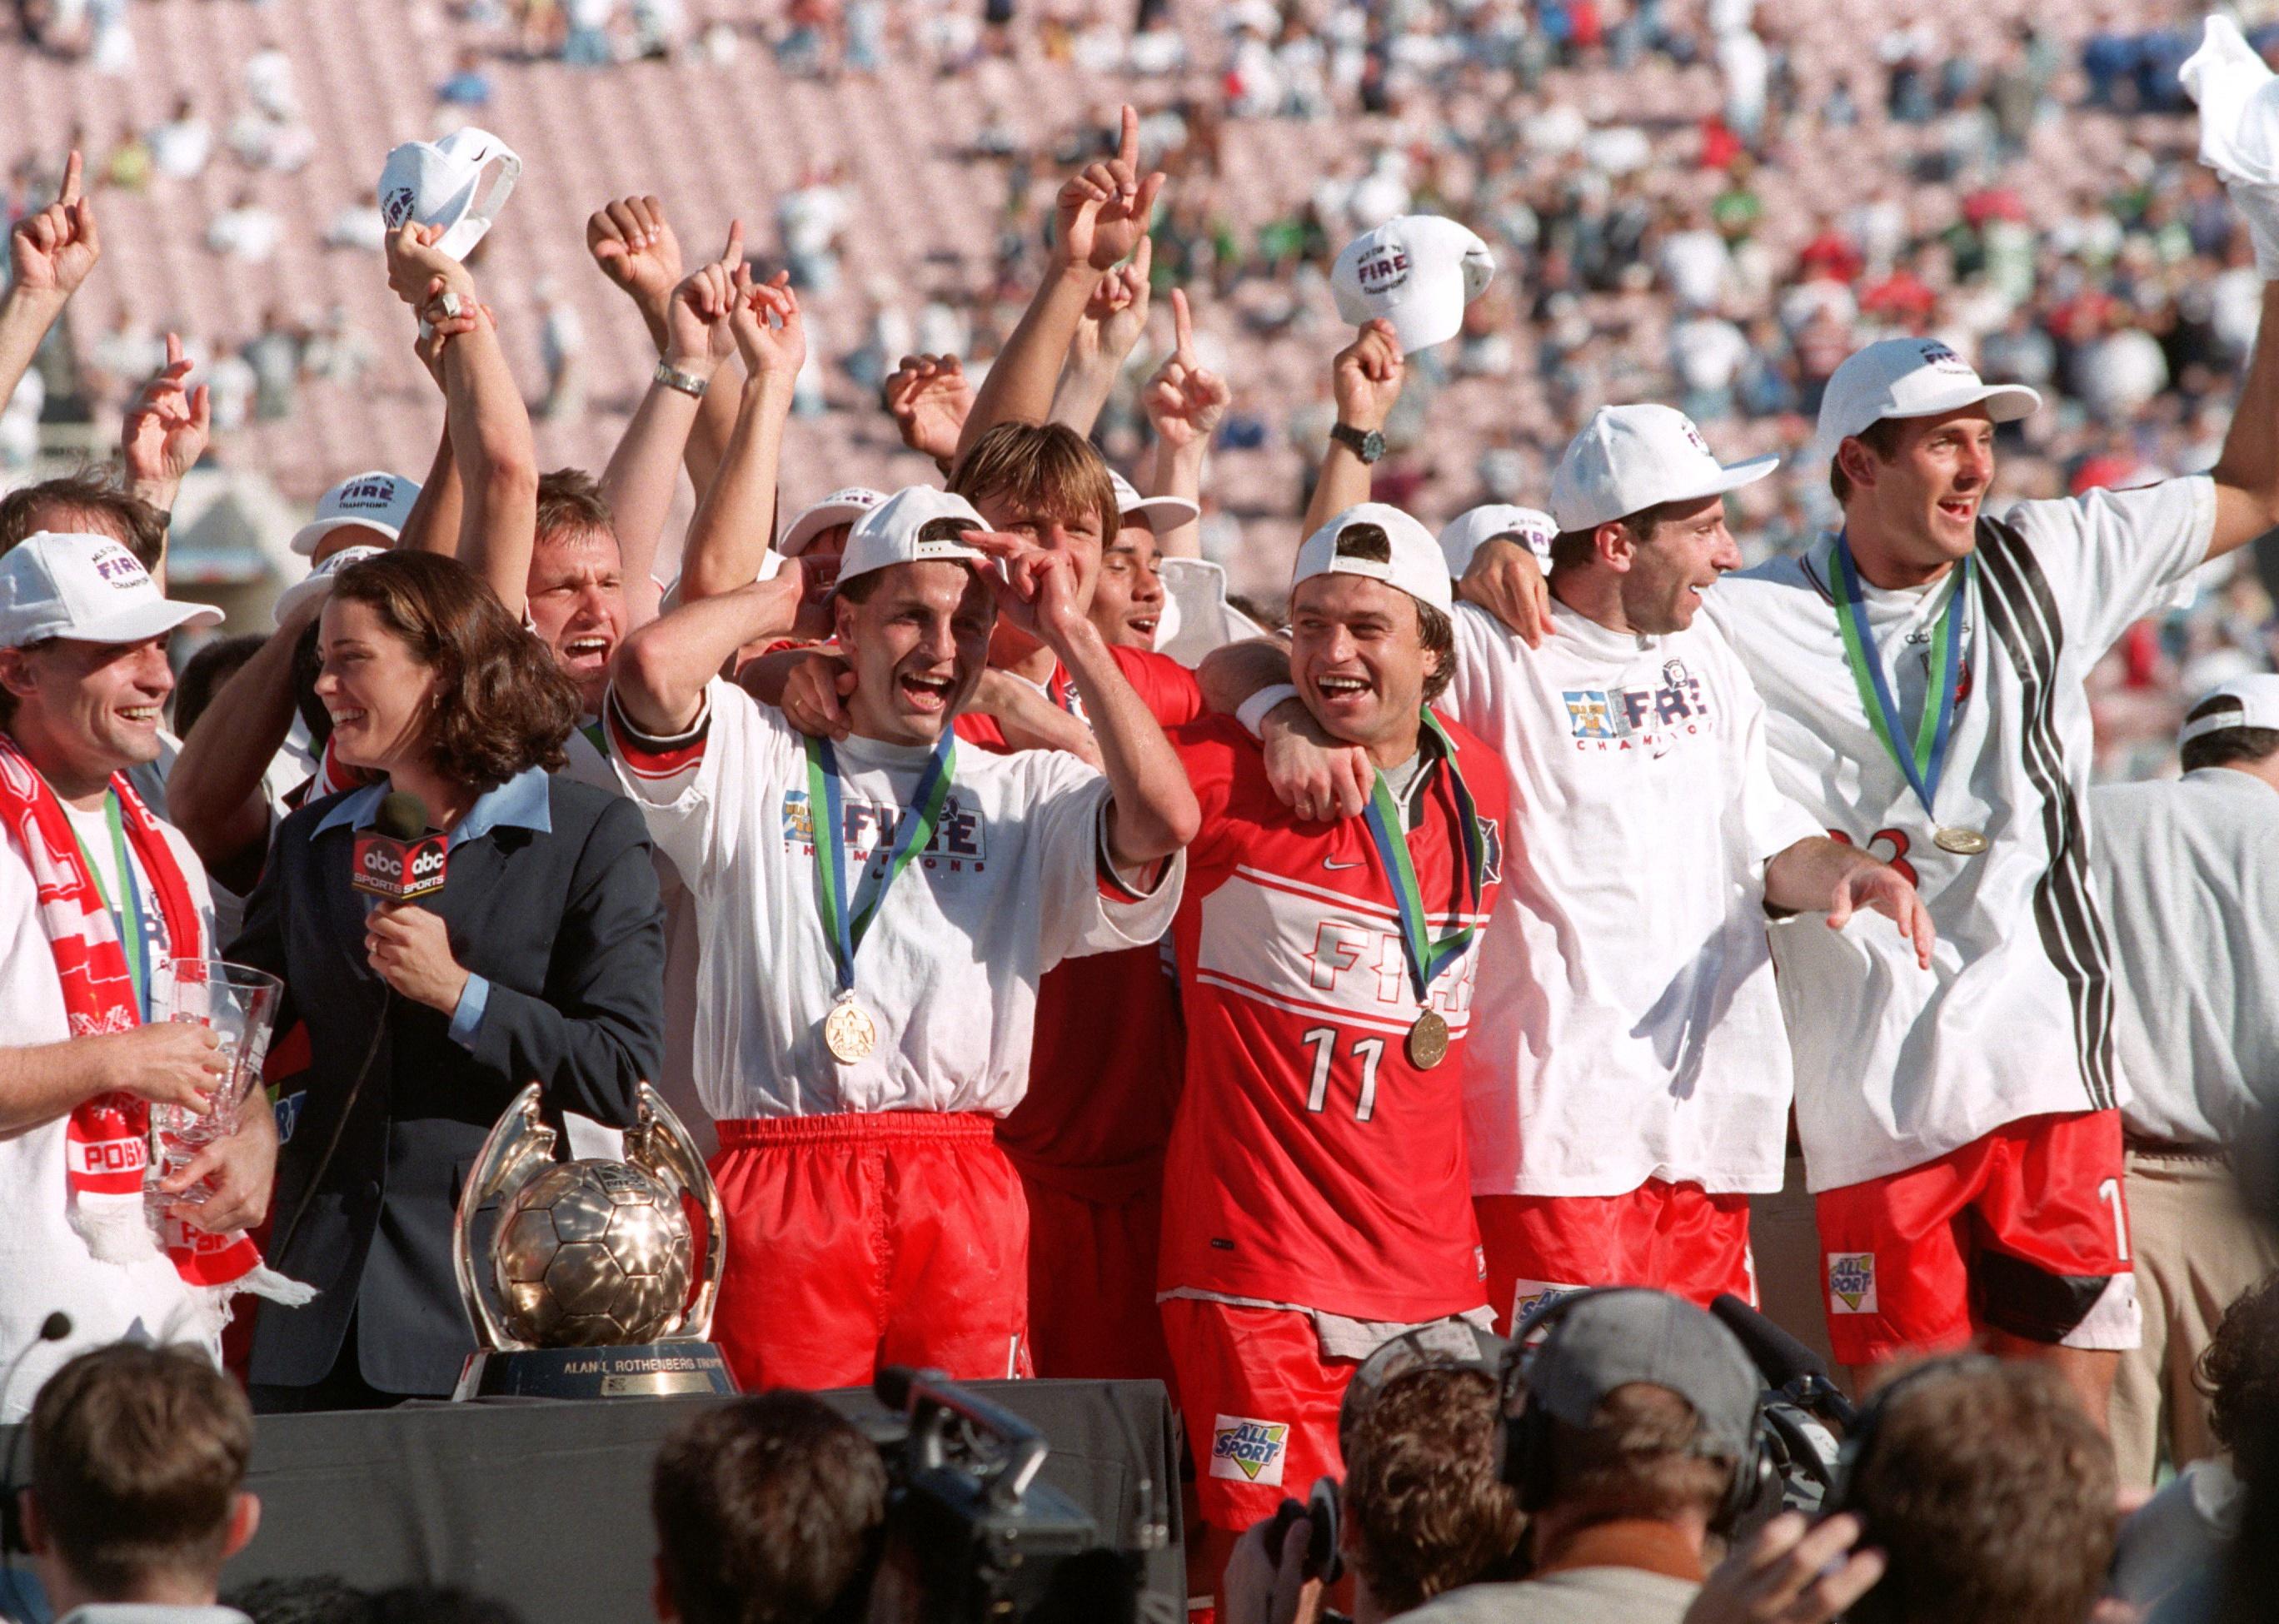 The victorious Chicago Fire team celebrate with the Alan Rothenberg trophy.